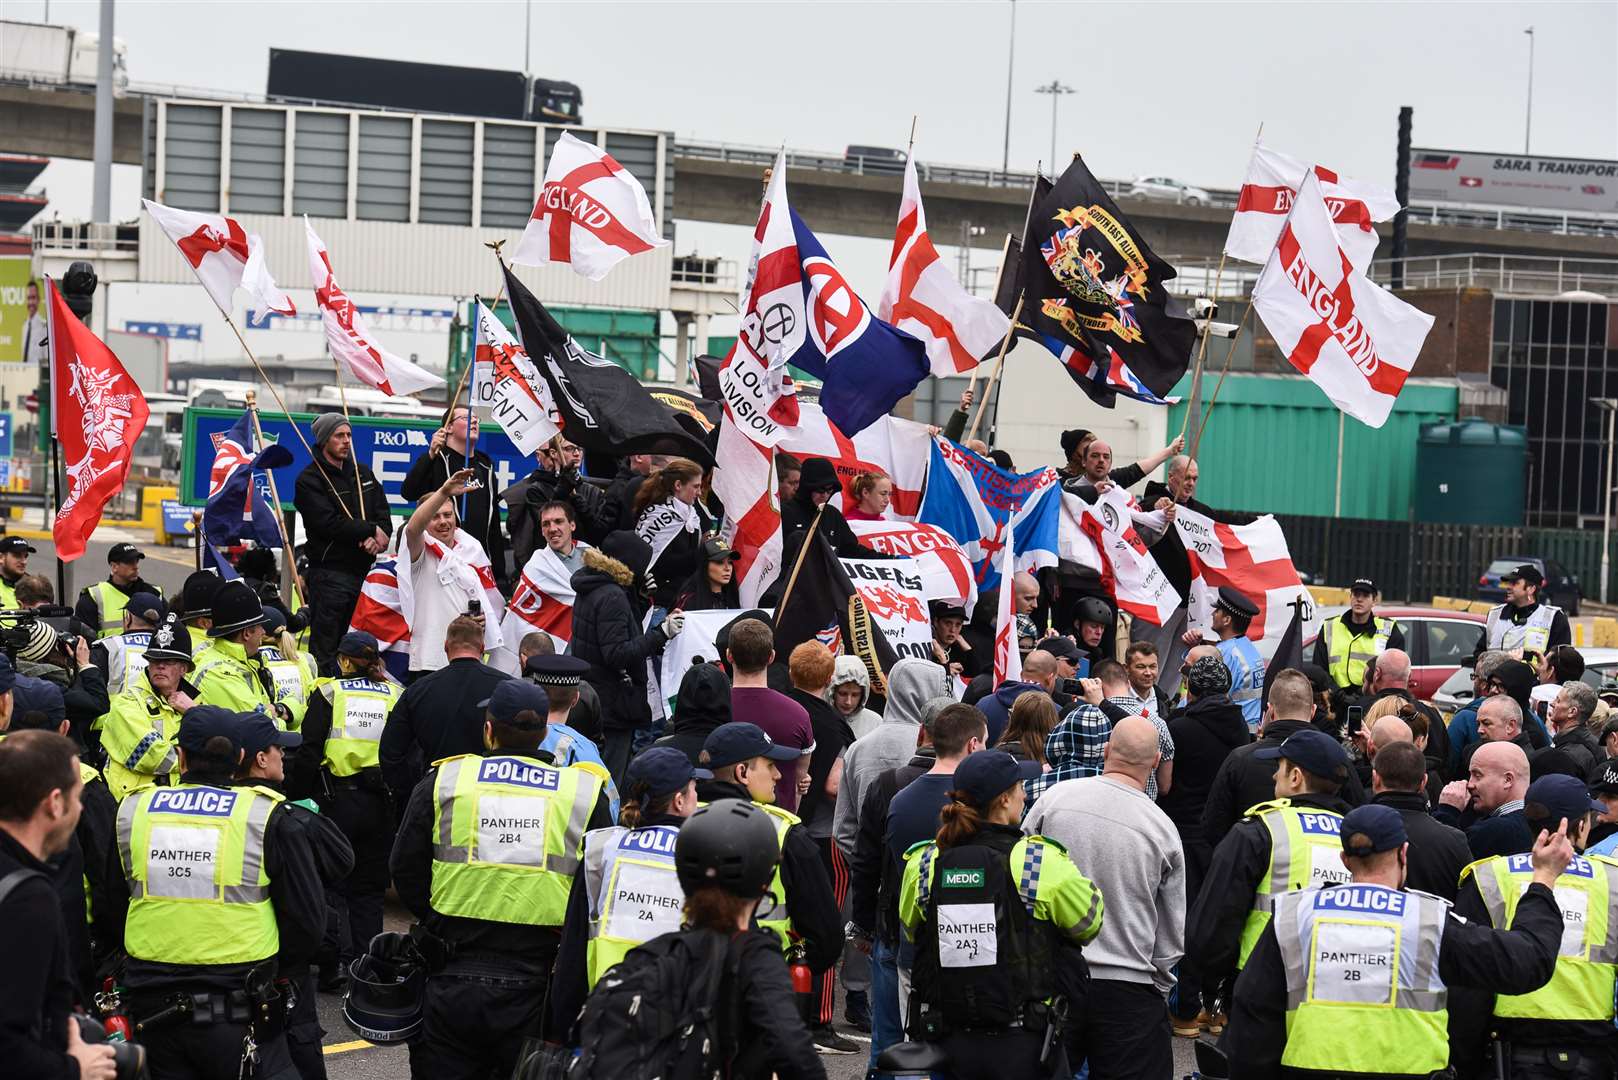 The far right protestors escorted by the police at an earlier march this year